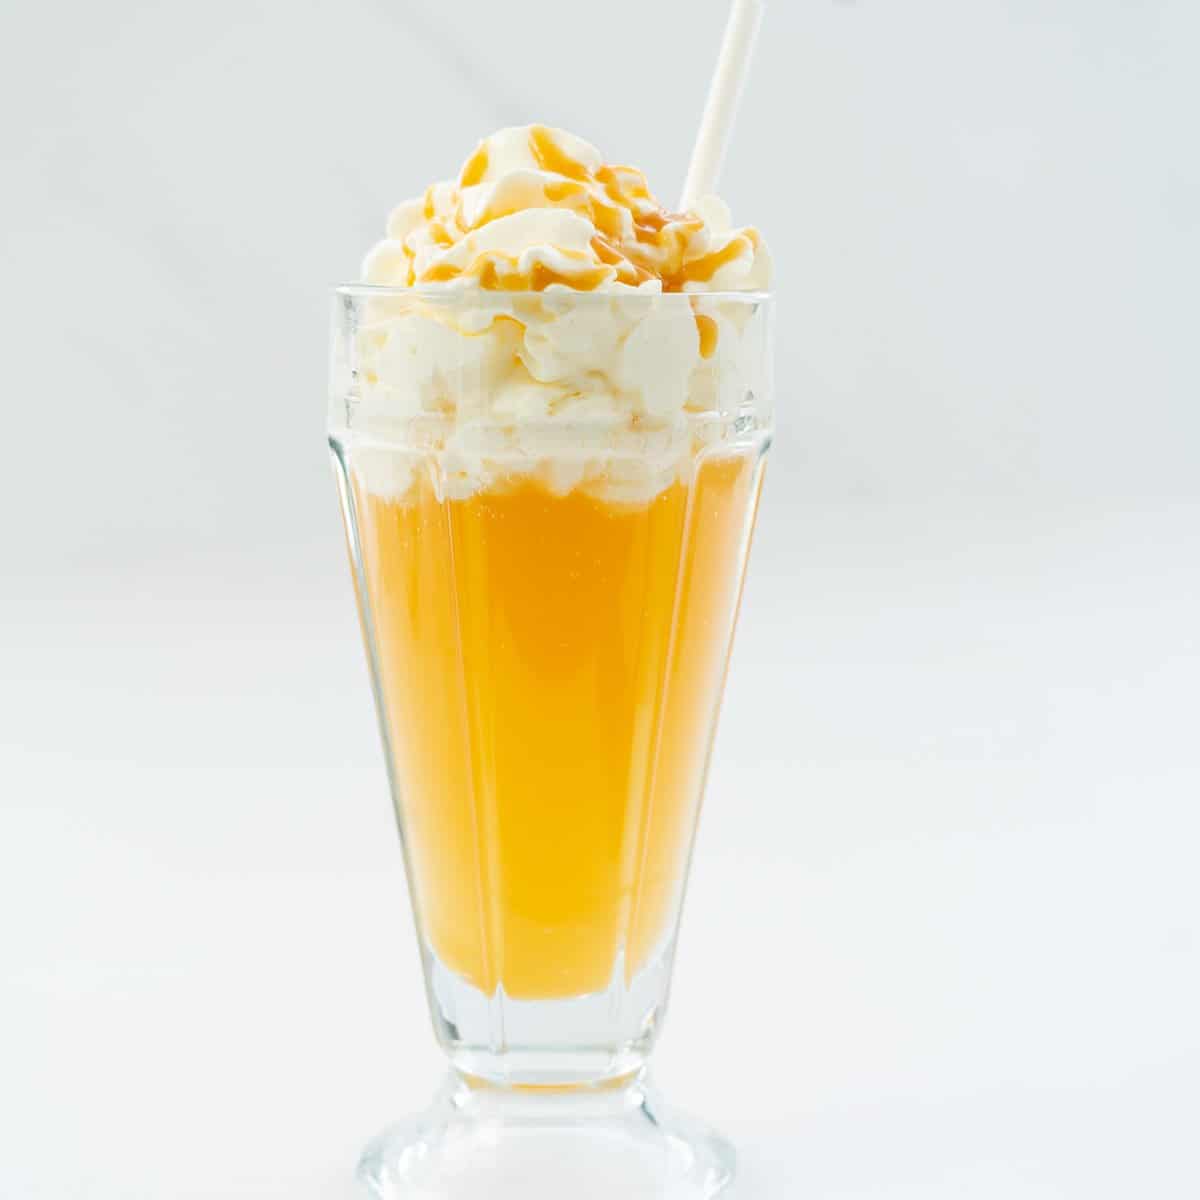 Golden butterbeer topped with whipped cream and caramel sauce in a tall ice cream sundae glass.